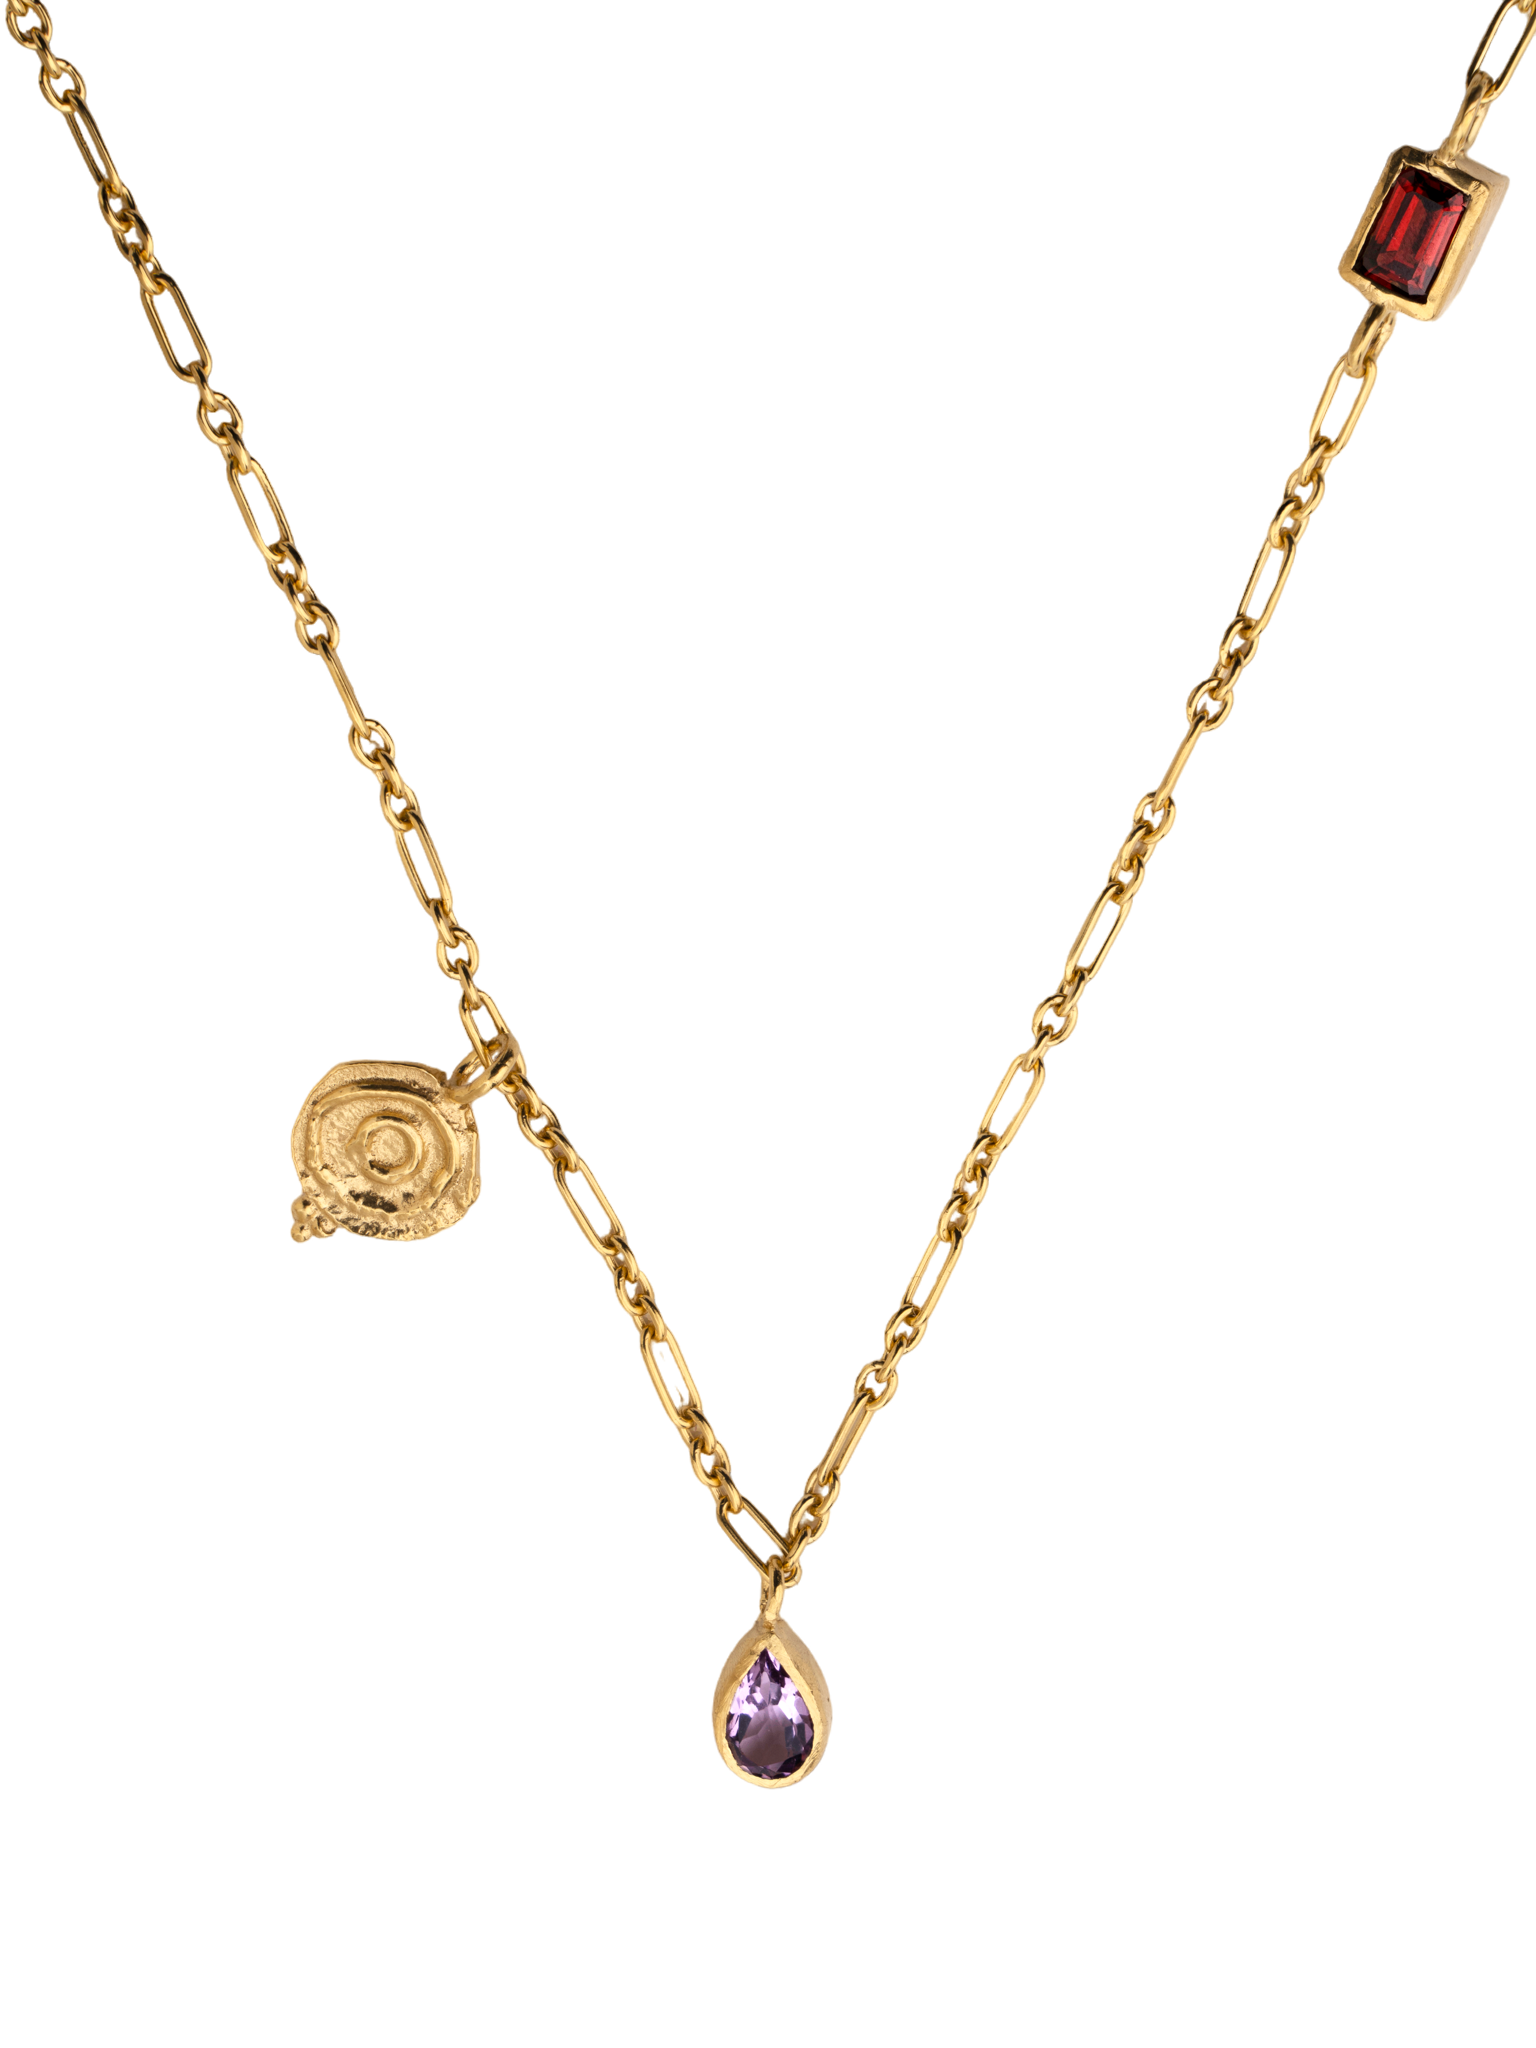 Magas long necklace in gold vermeil